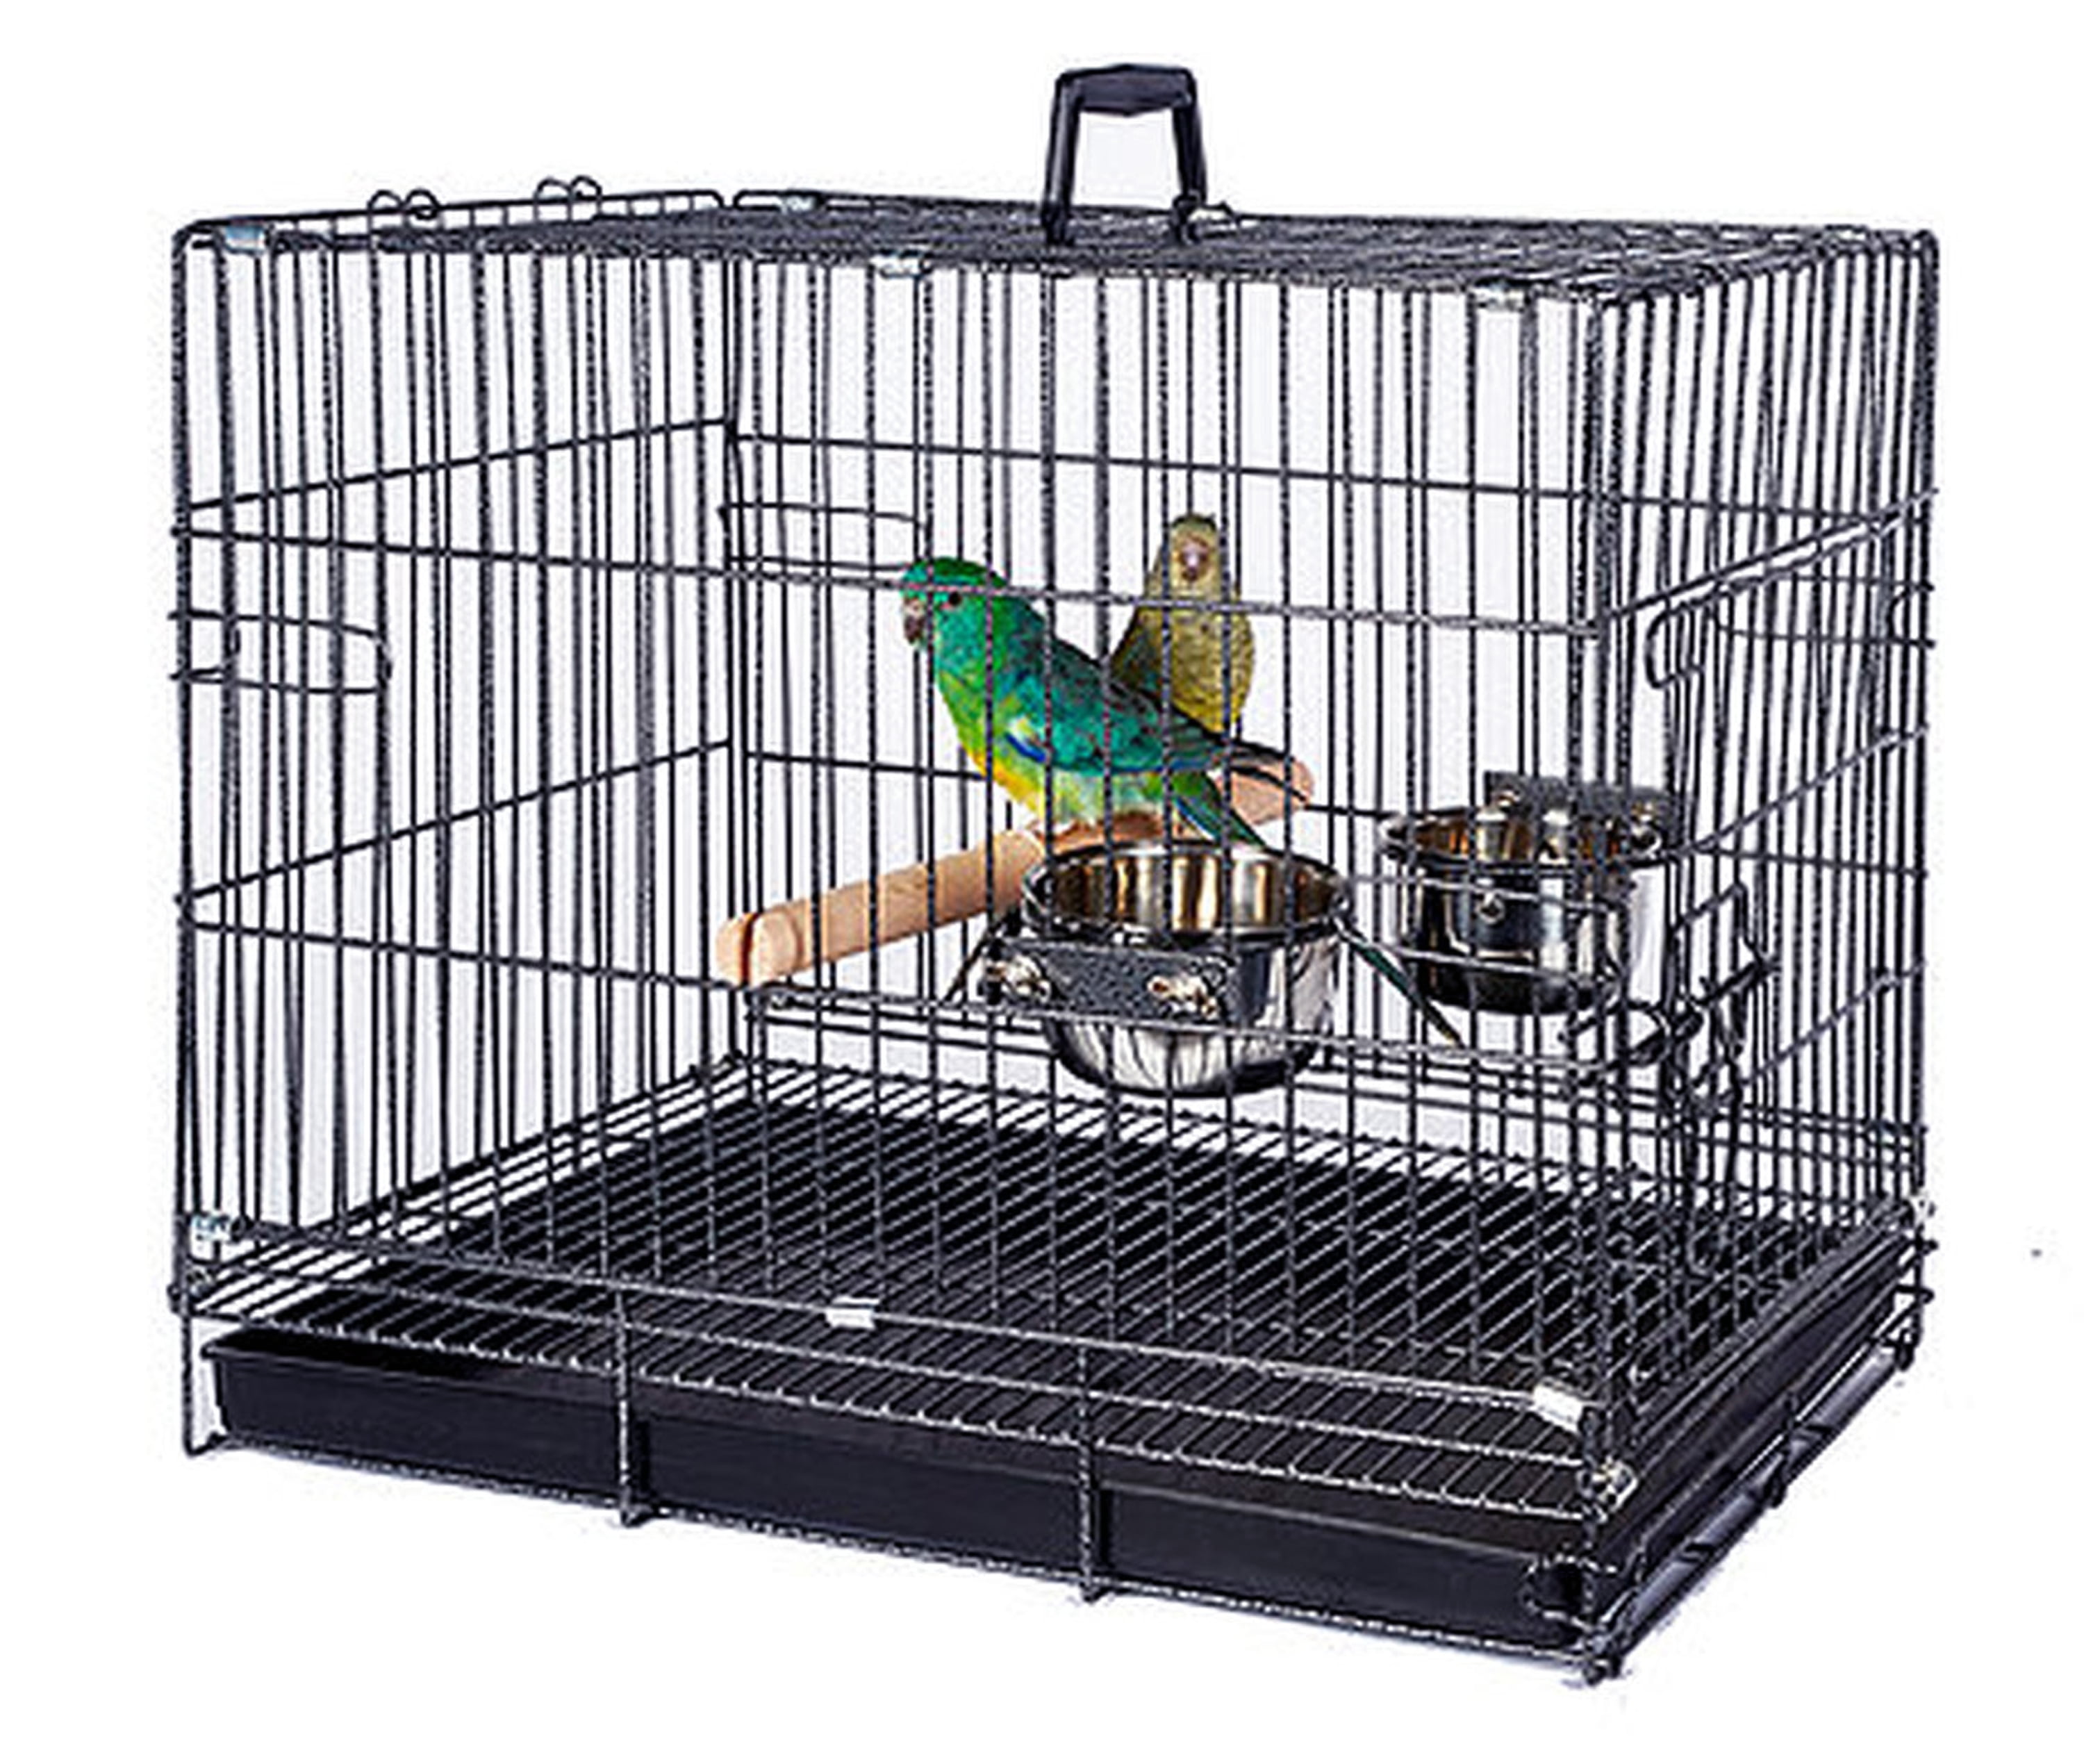 Stainless Steel Square Bird Cage Parrot Travel Carrier Perch 